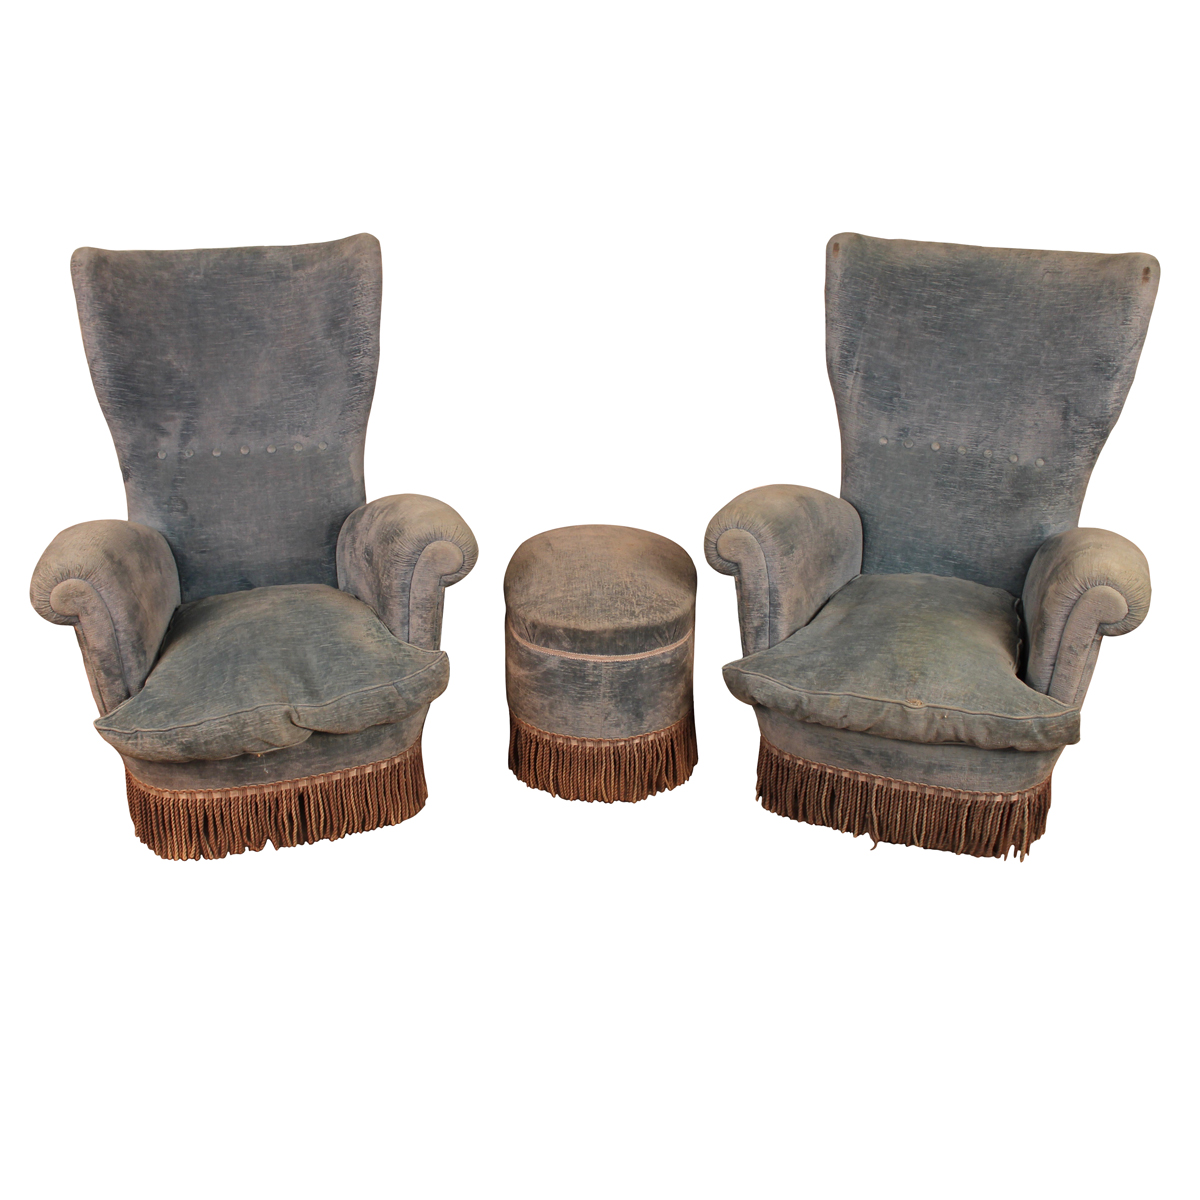 COPPIA POLTRONE ED UN POUF-COUPLE OF ARMCHAIRS AND A POUF